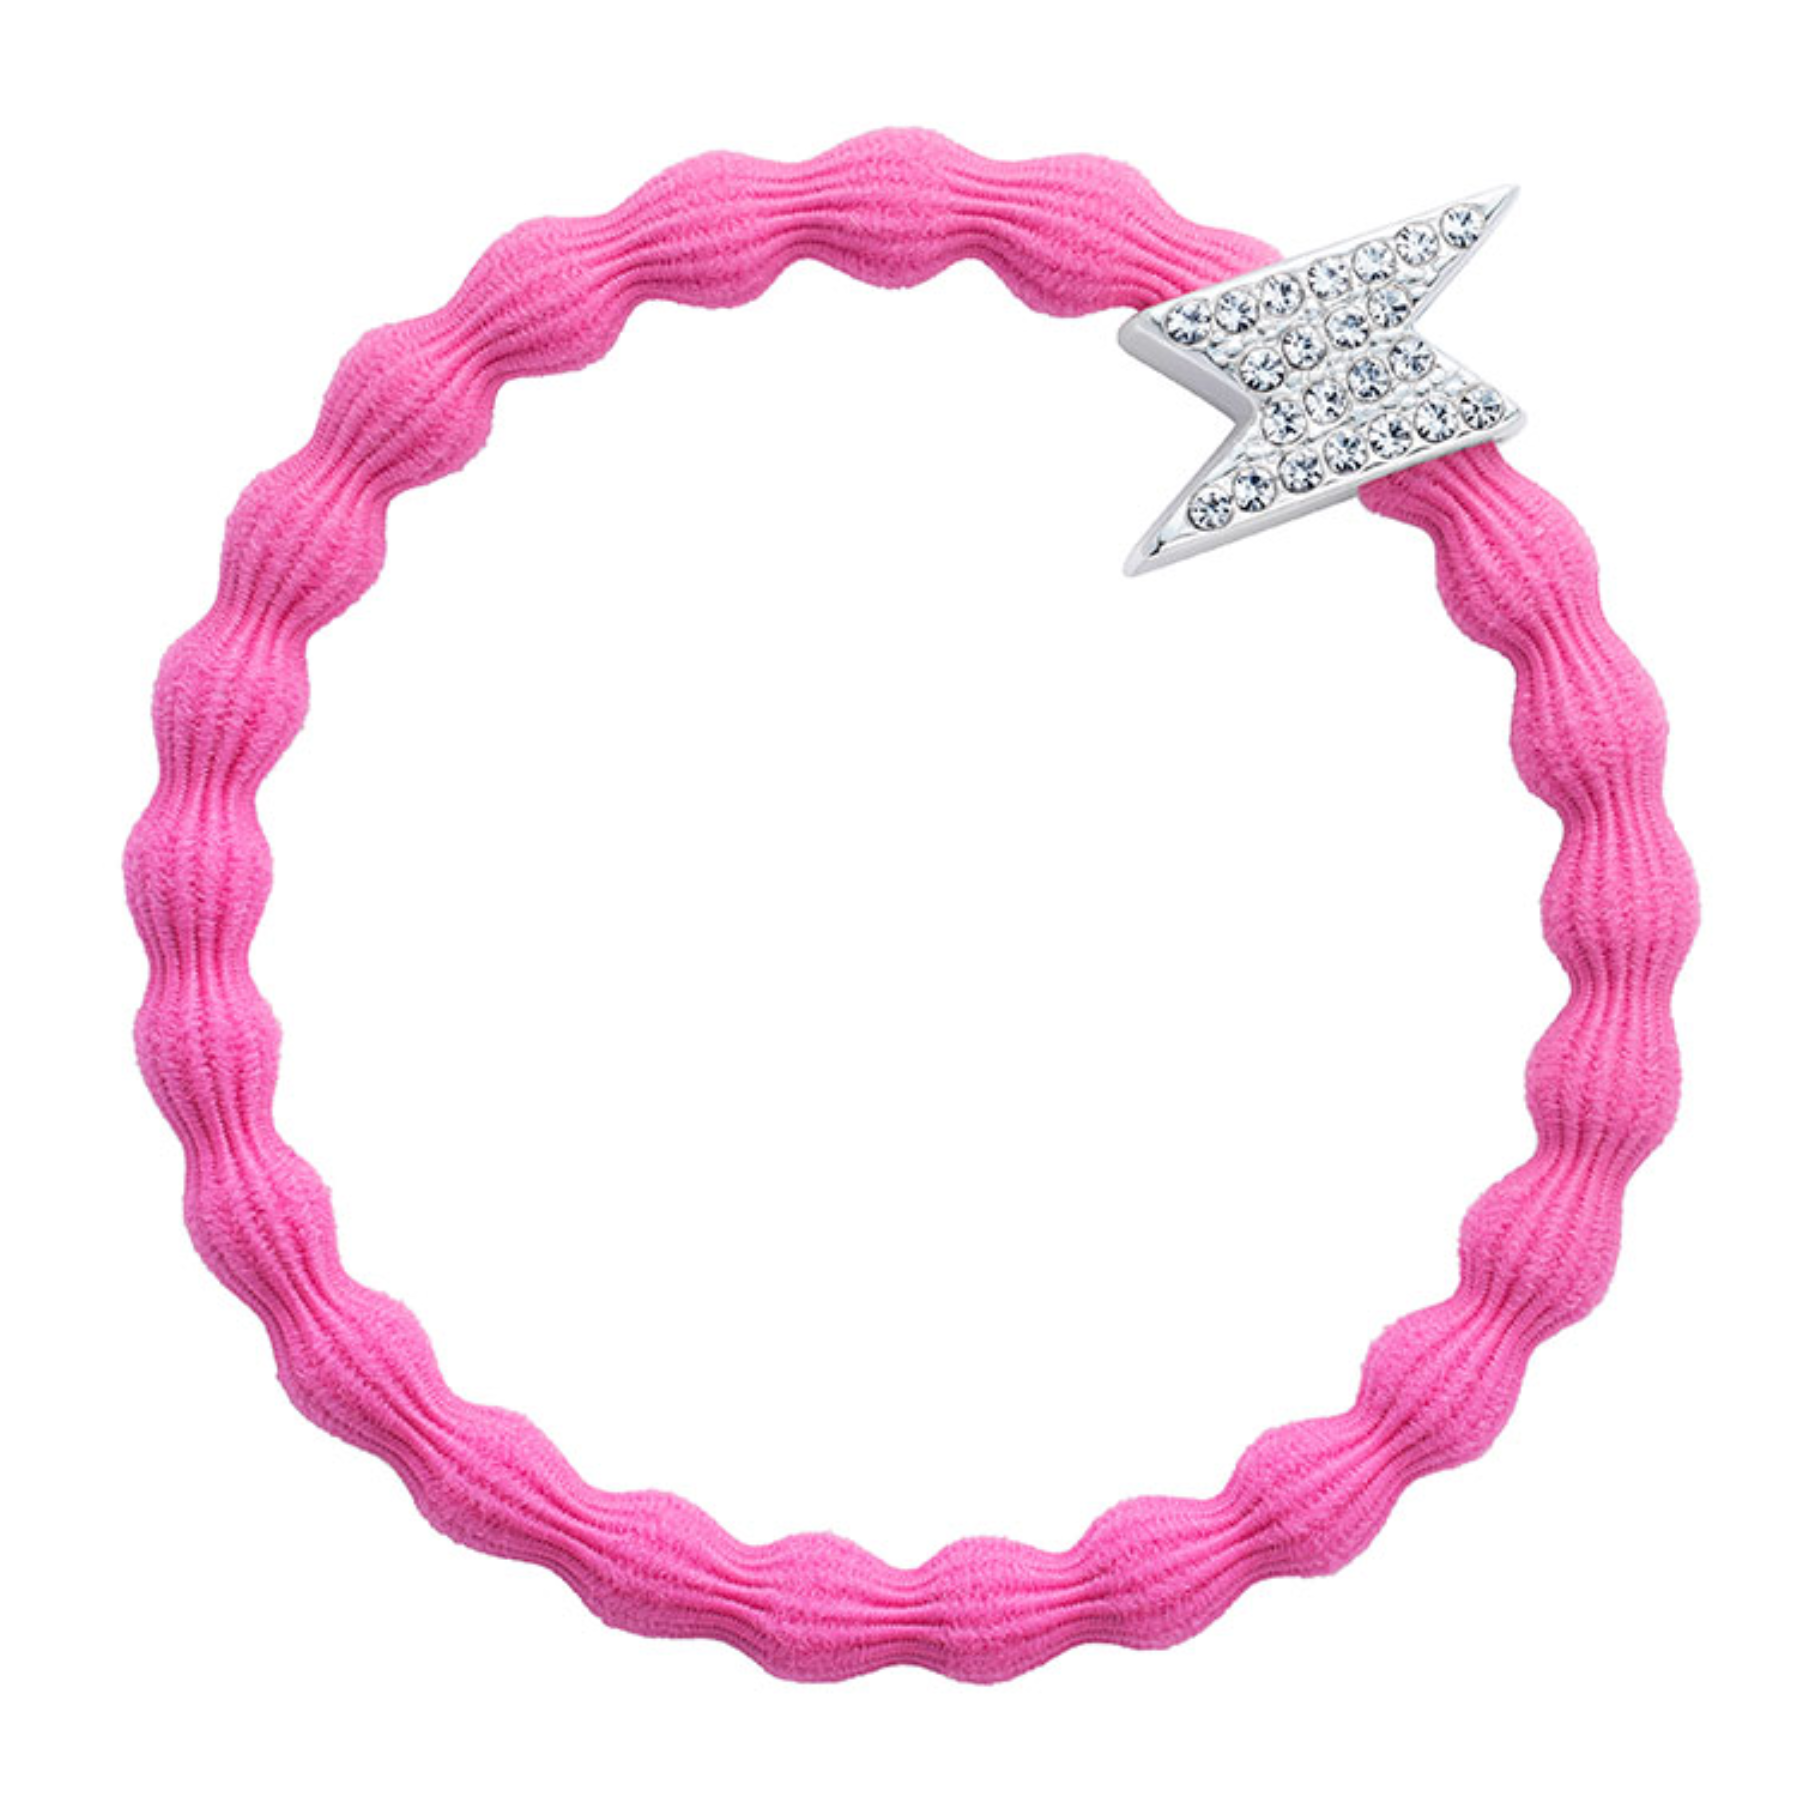 Neon Pink Hair Band with Diamonte Lightning Bolt